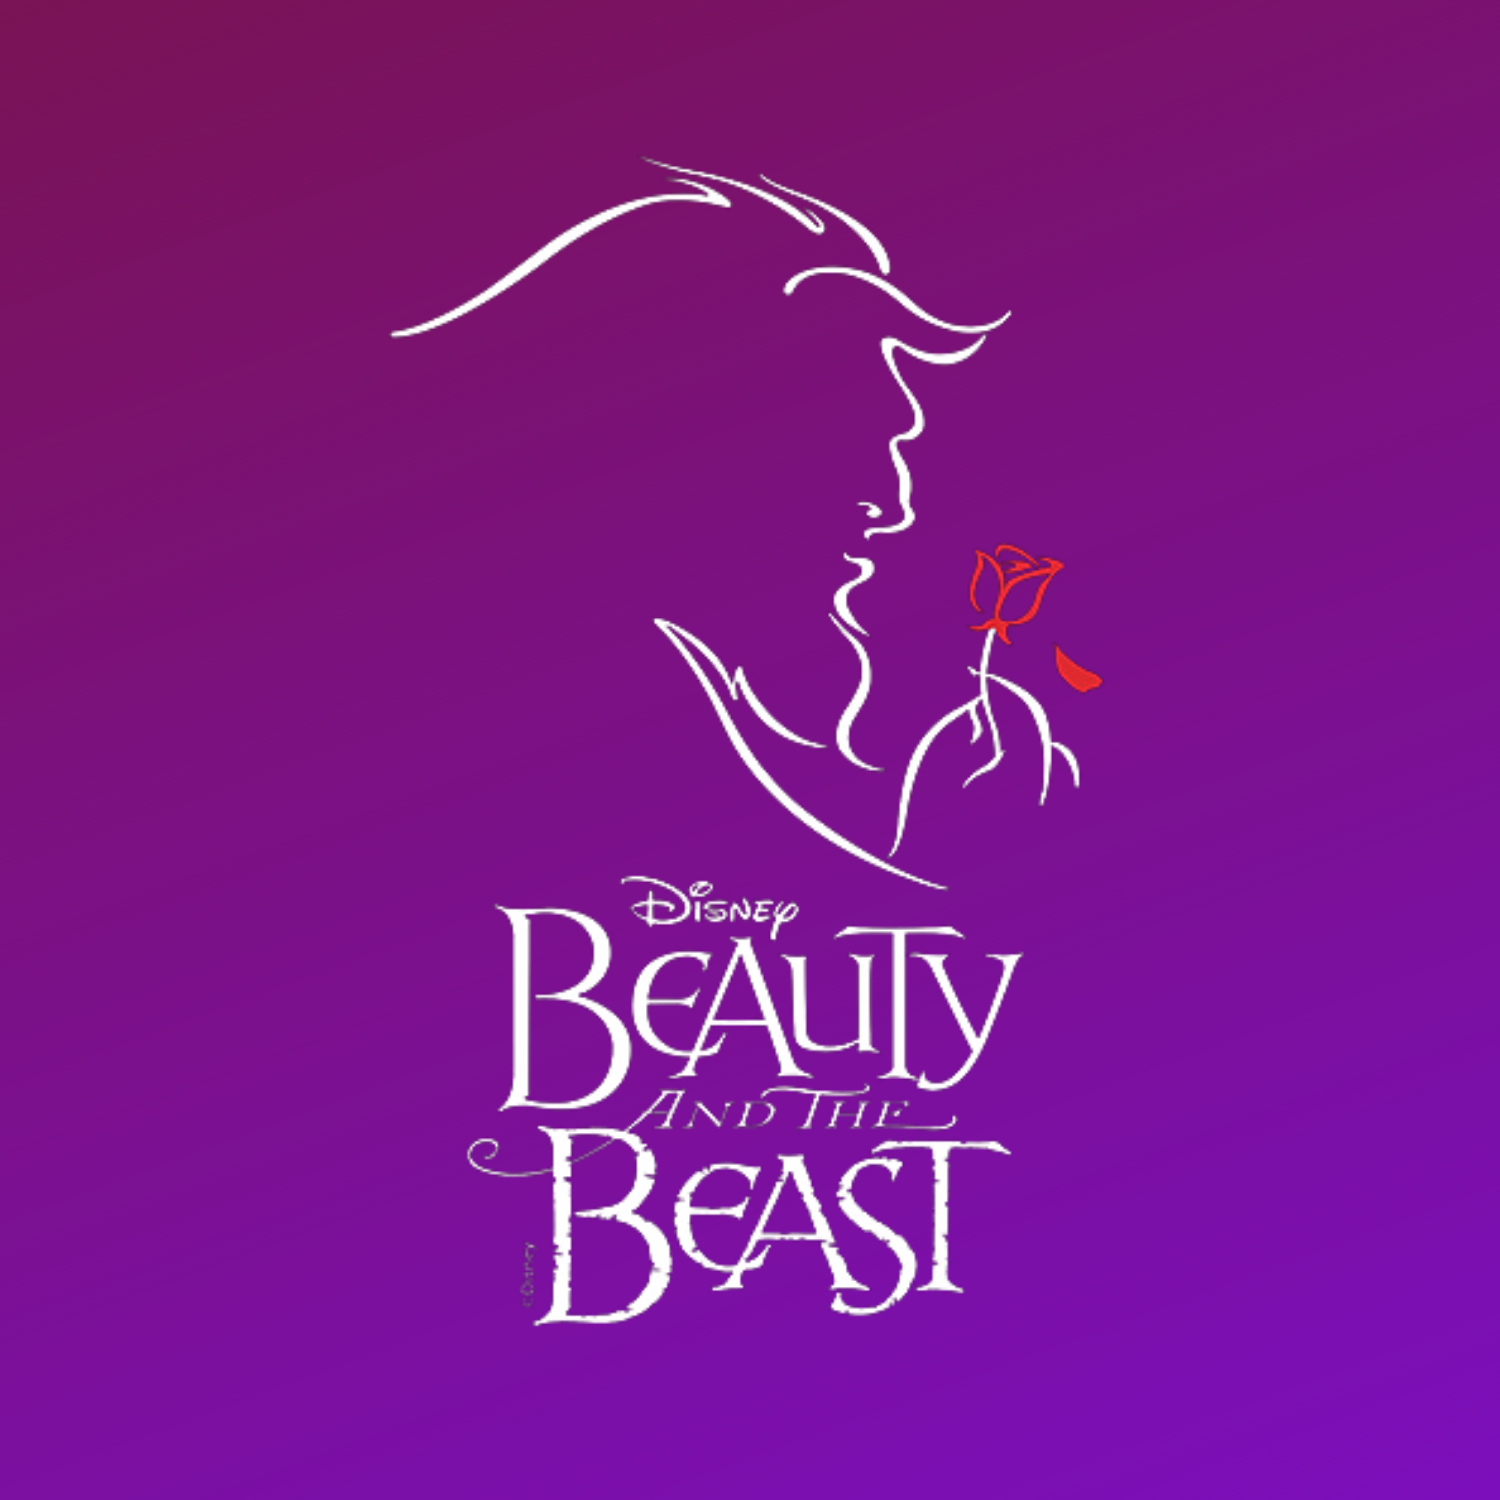 Disney’s Beauty and the Beast – 2022